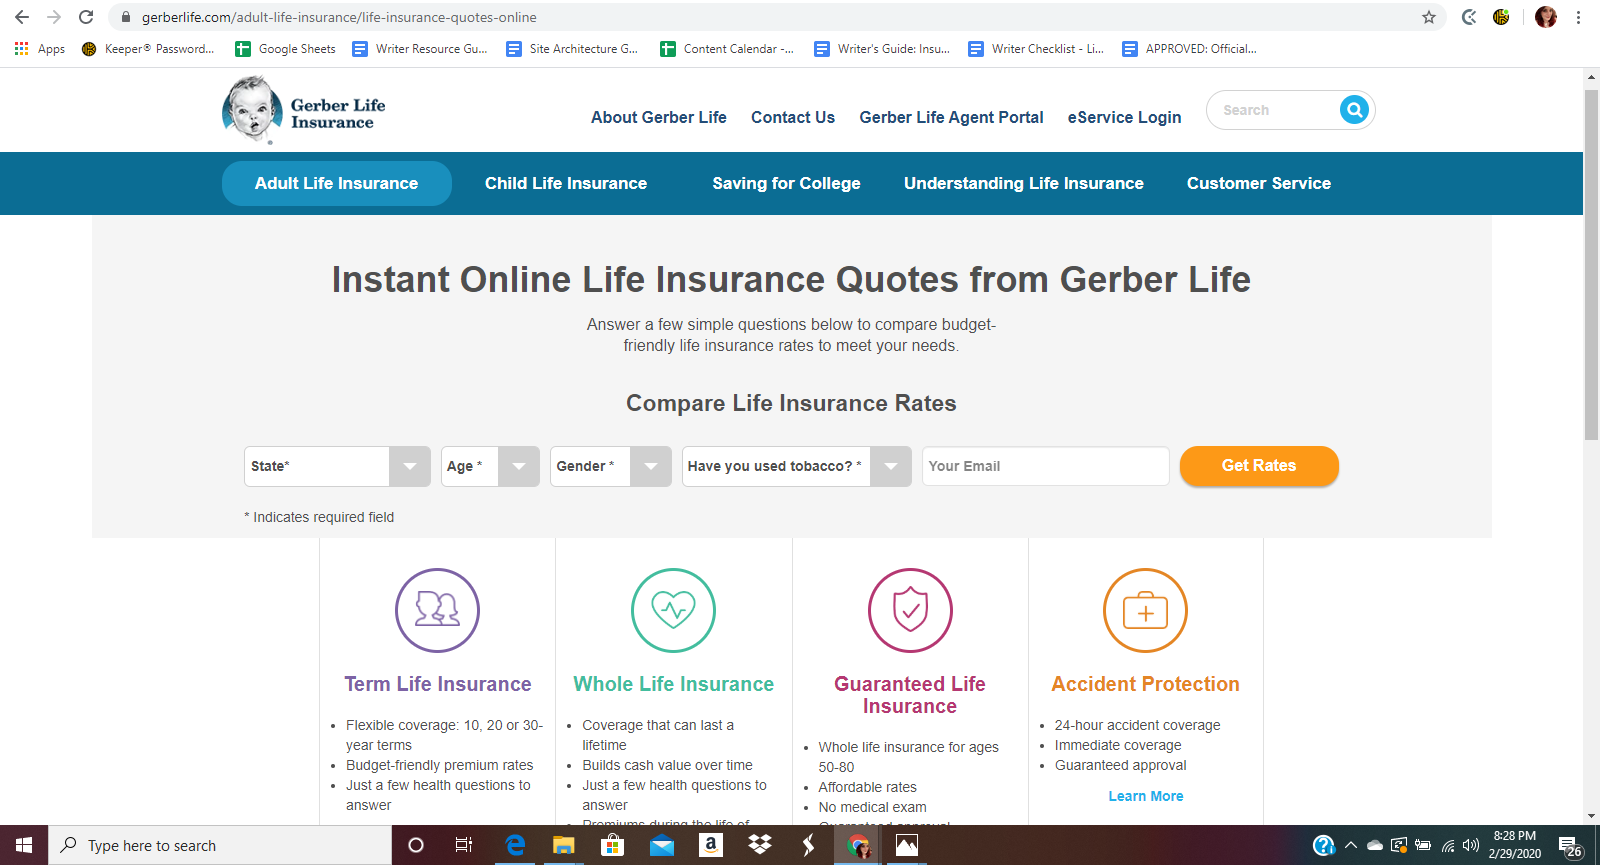 Gerber Life Website instant online insurance quotes page